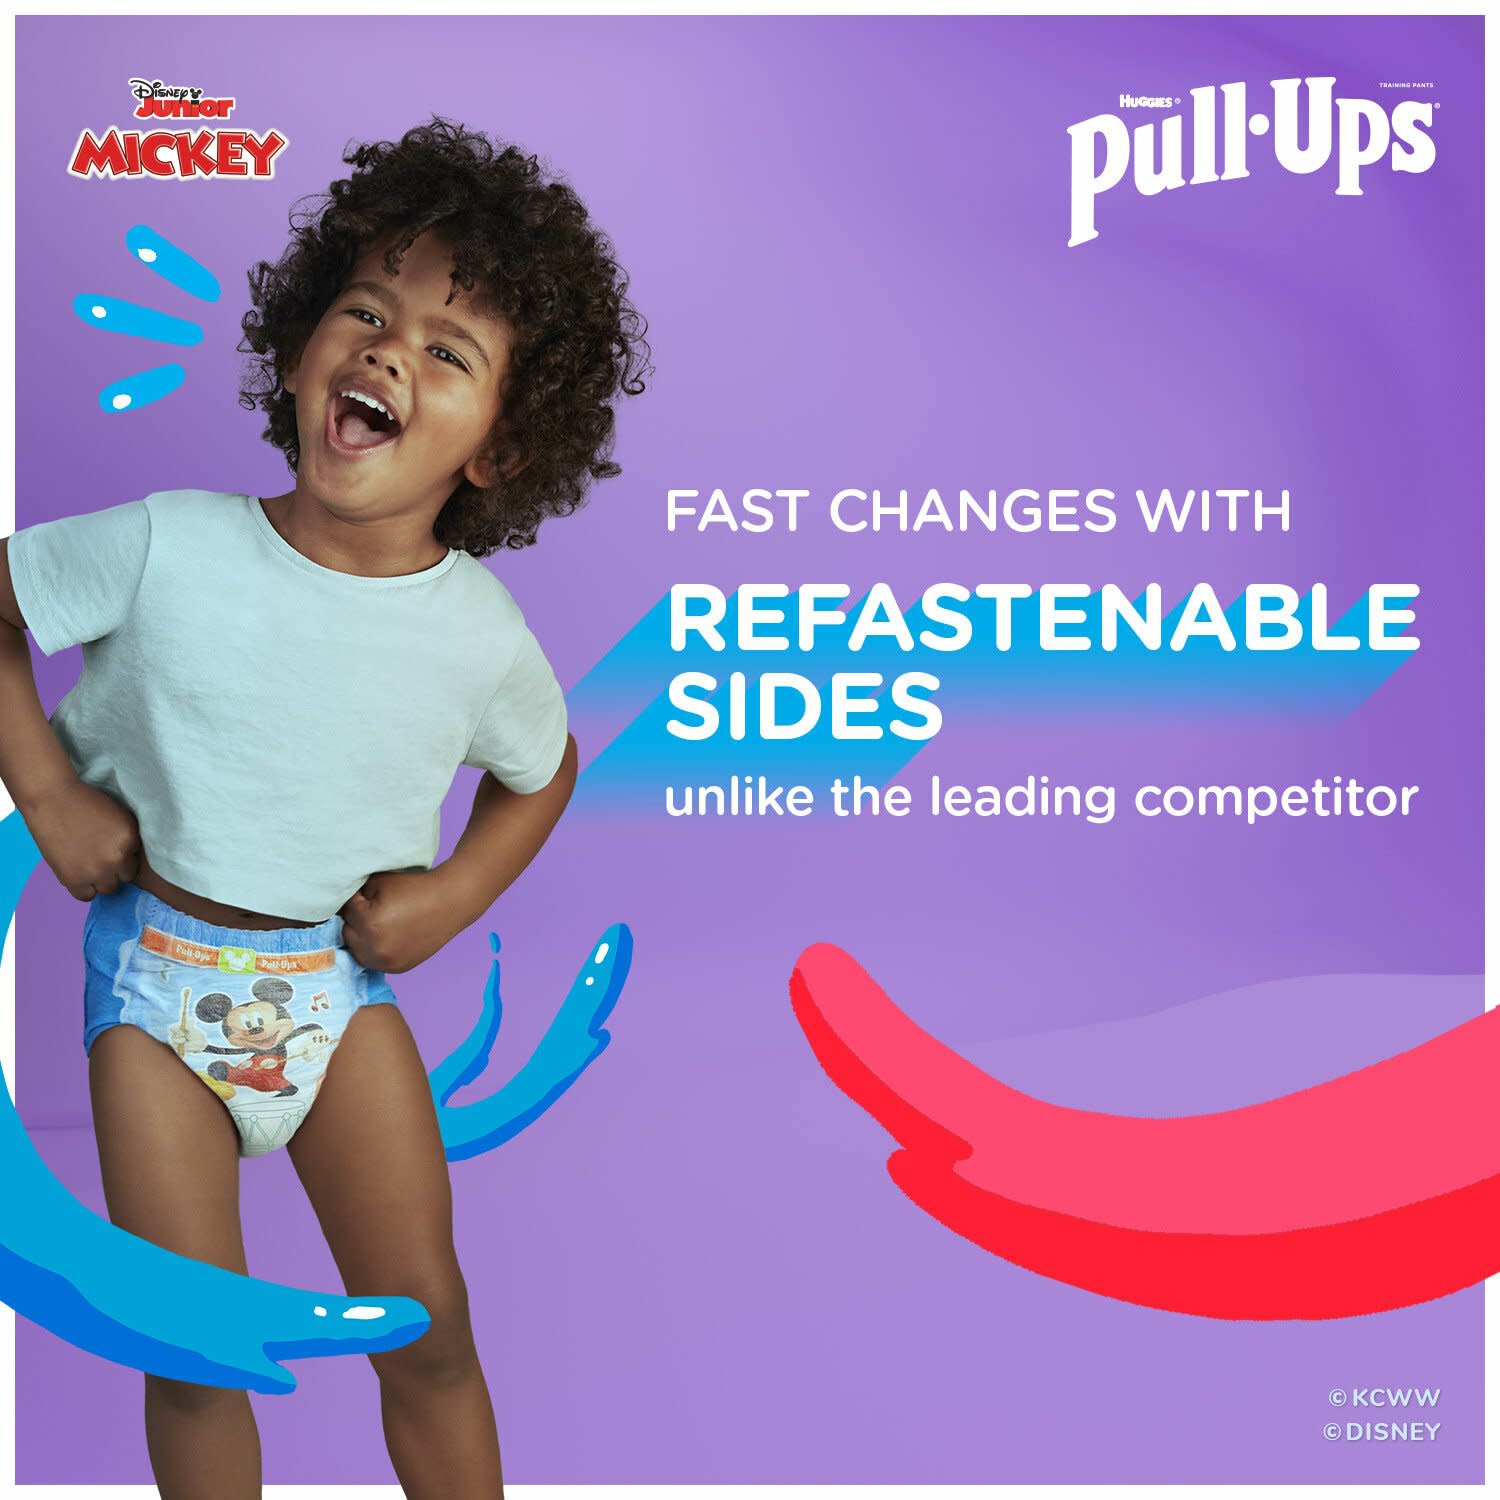 Pull-Ups Boys' Potty Training Pants Size 4, 2T-3T, 94 Ct - image 8 of 8